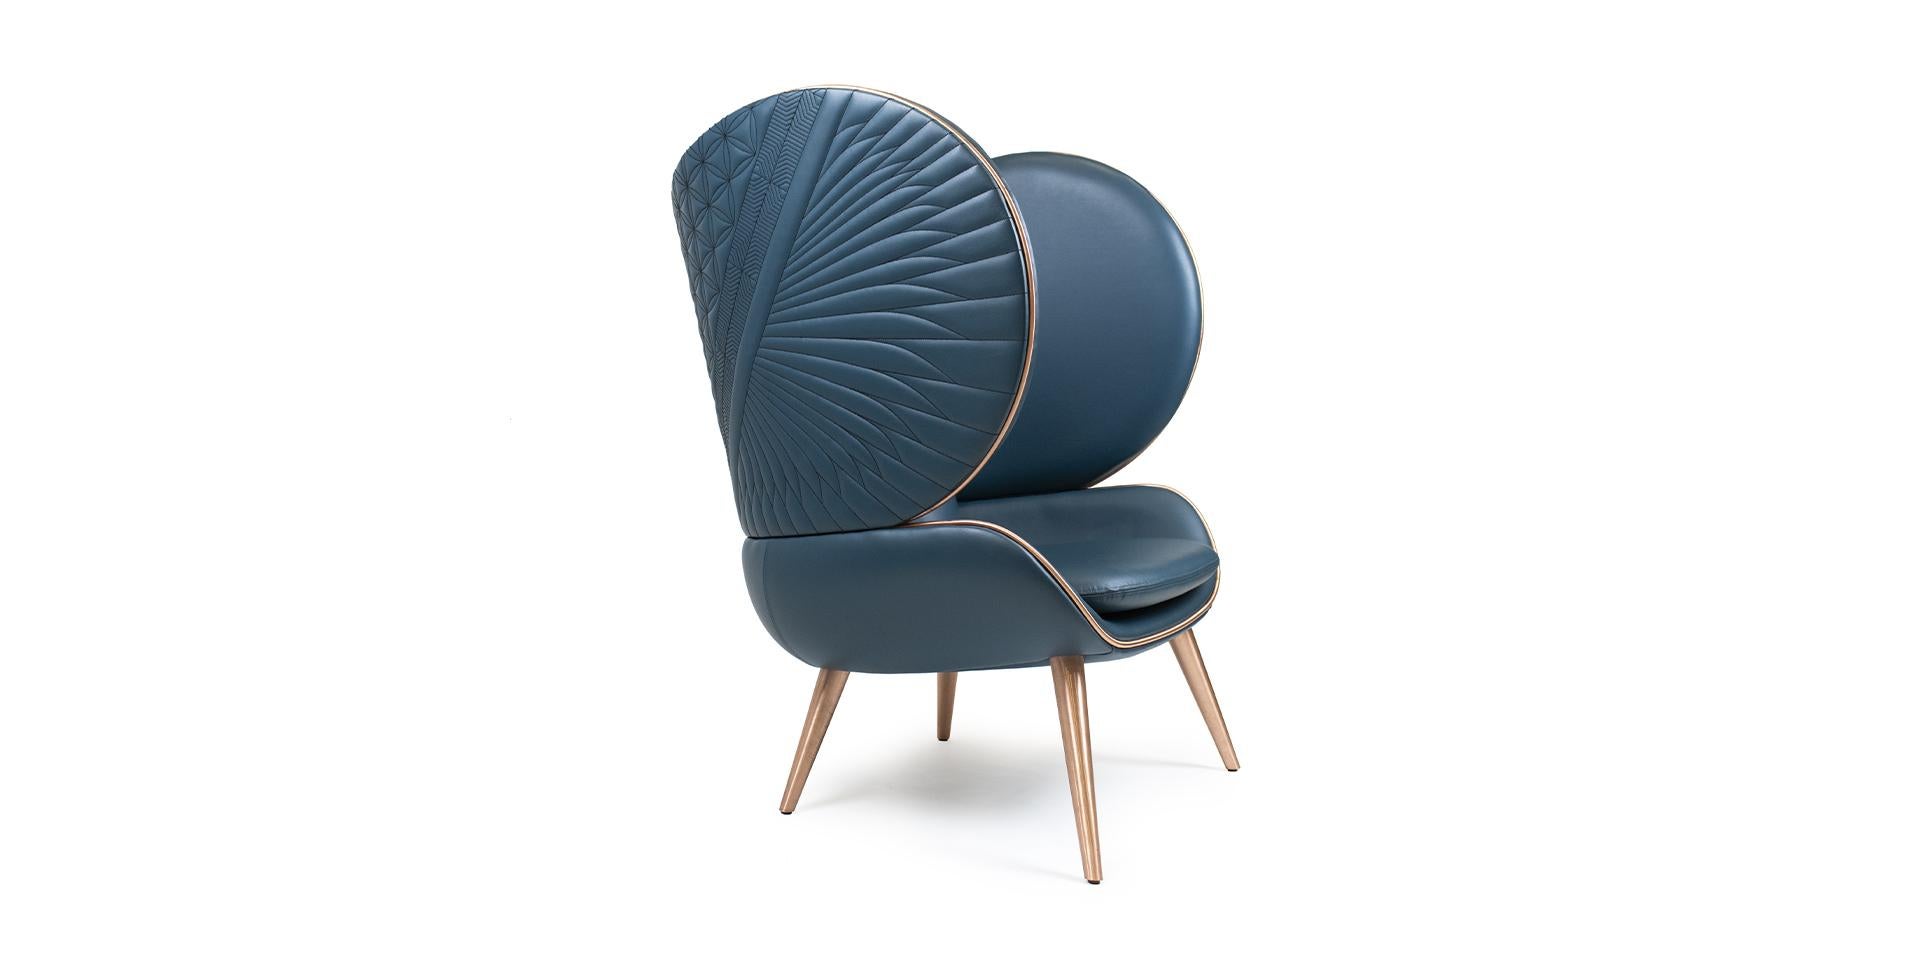 If you would like to add a special touch of personality to the luxury living room or hall, Acoma is that piece. Its different curves surronded by cooper, and the back side made with a wonderful embroidery pattern, makes the Acoma armchair the best